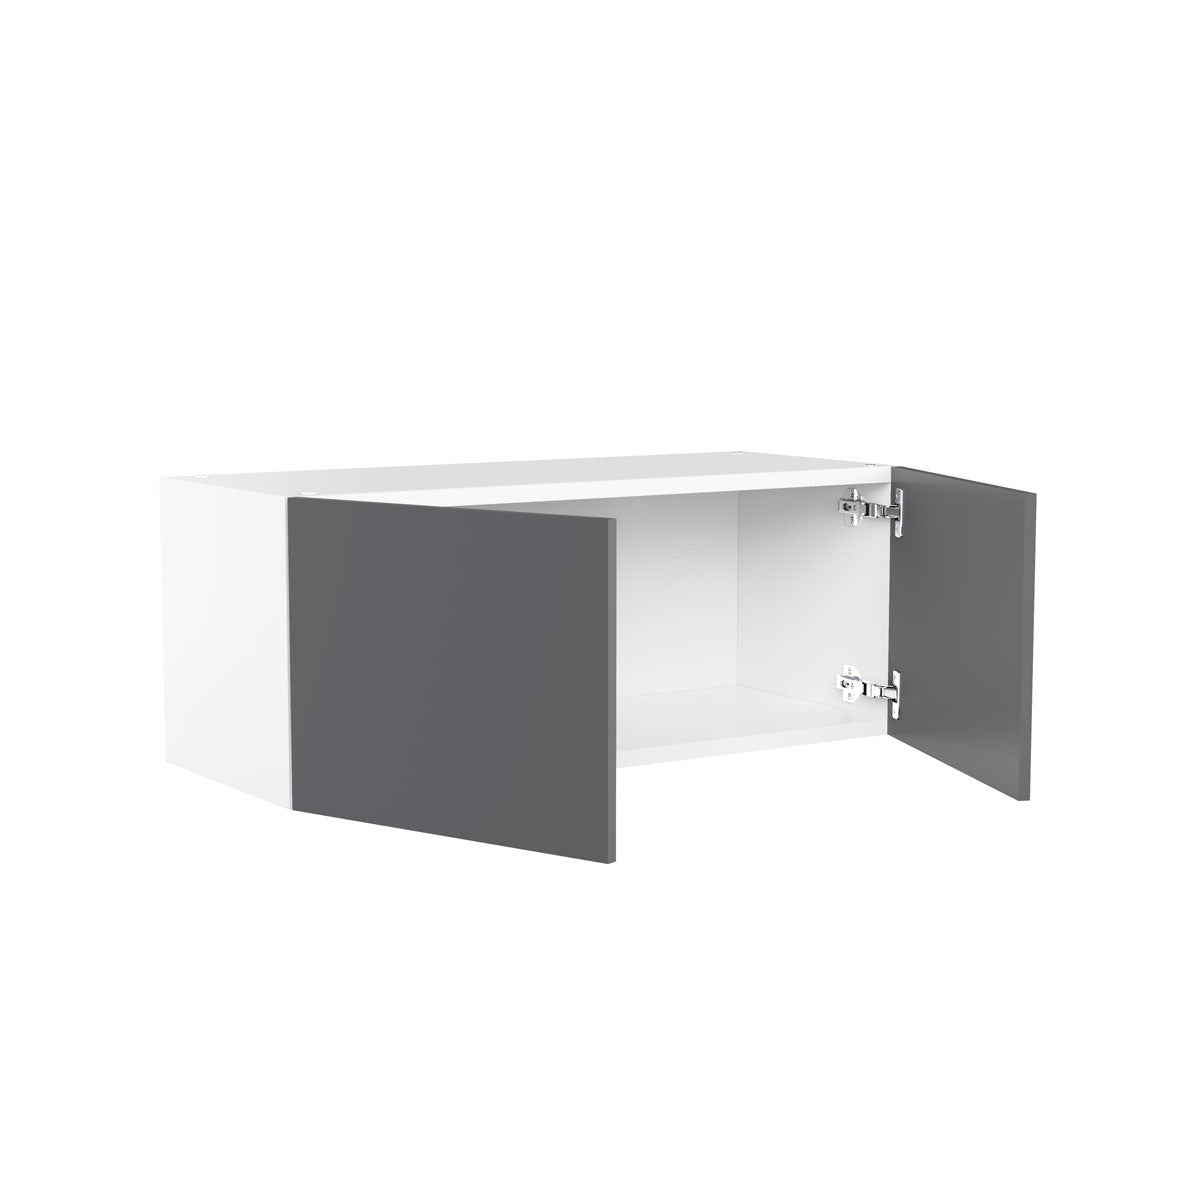 RTA - Glossy Grey - Double Door Wall Cabinets | 30"W x 12"H x 12"D